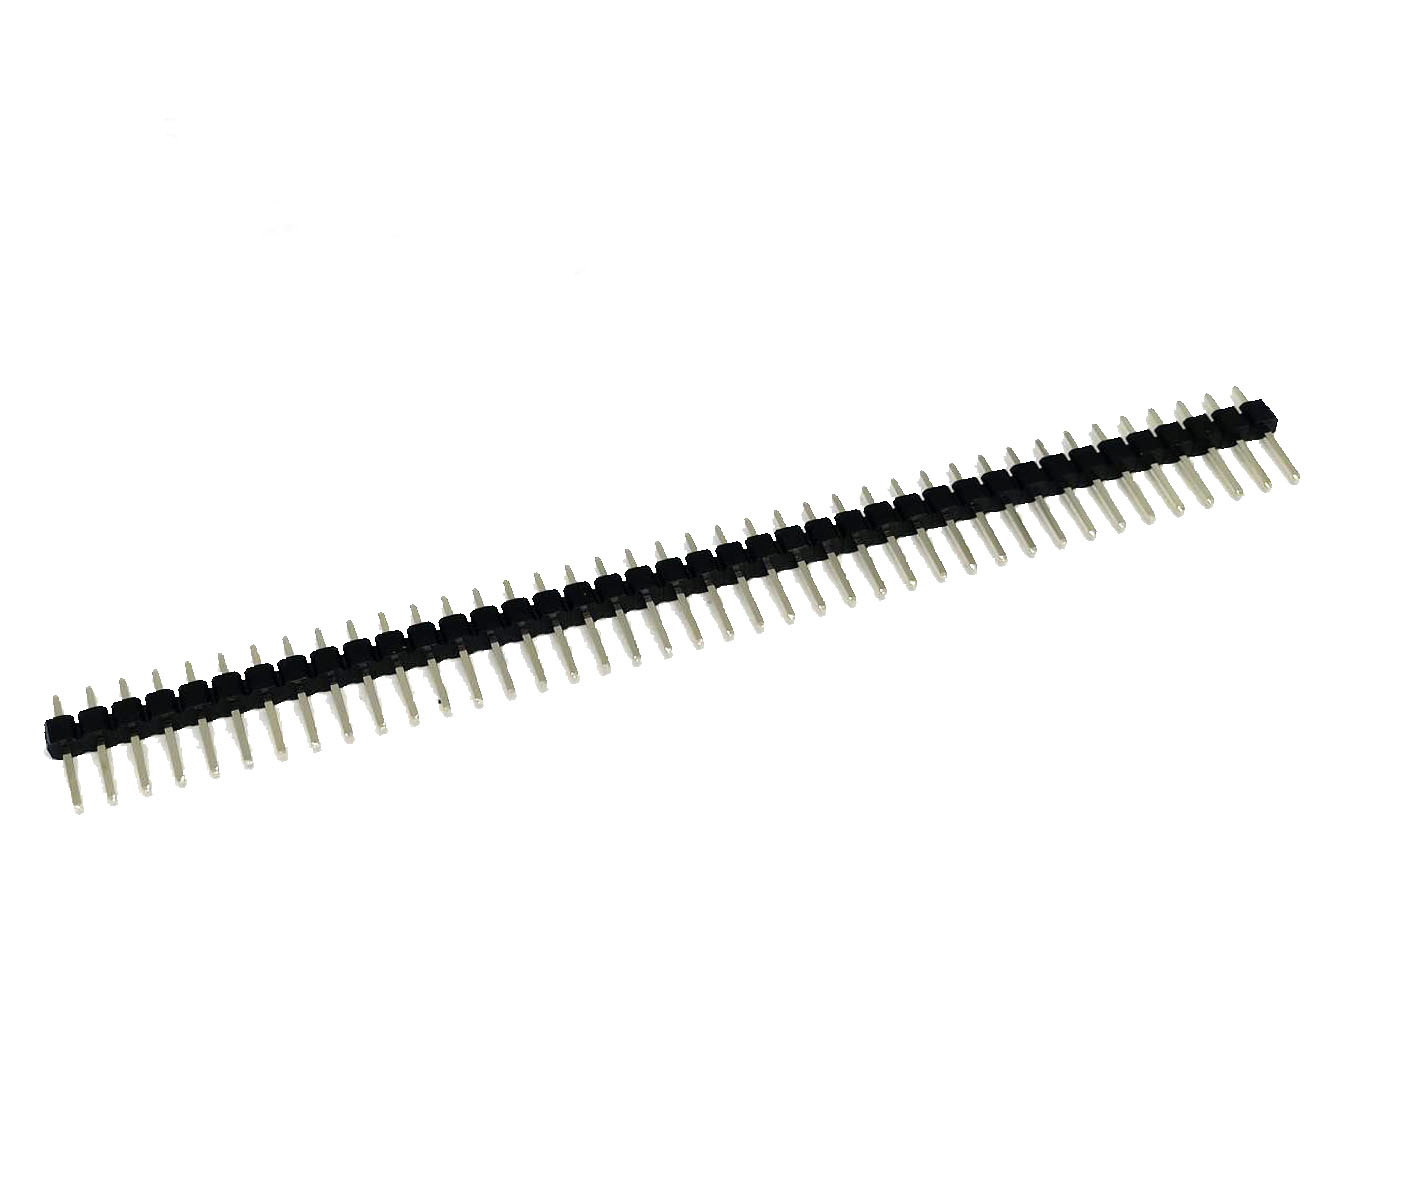 Straight 1x40 Pins Male Pin Header 2.54mm Pitch